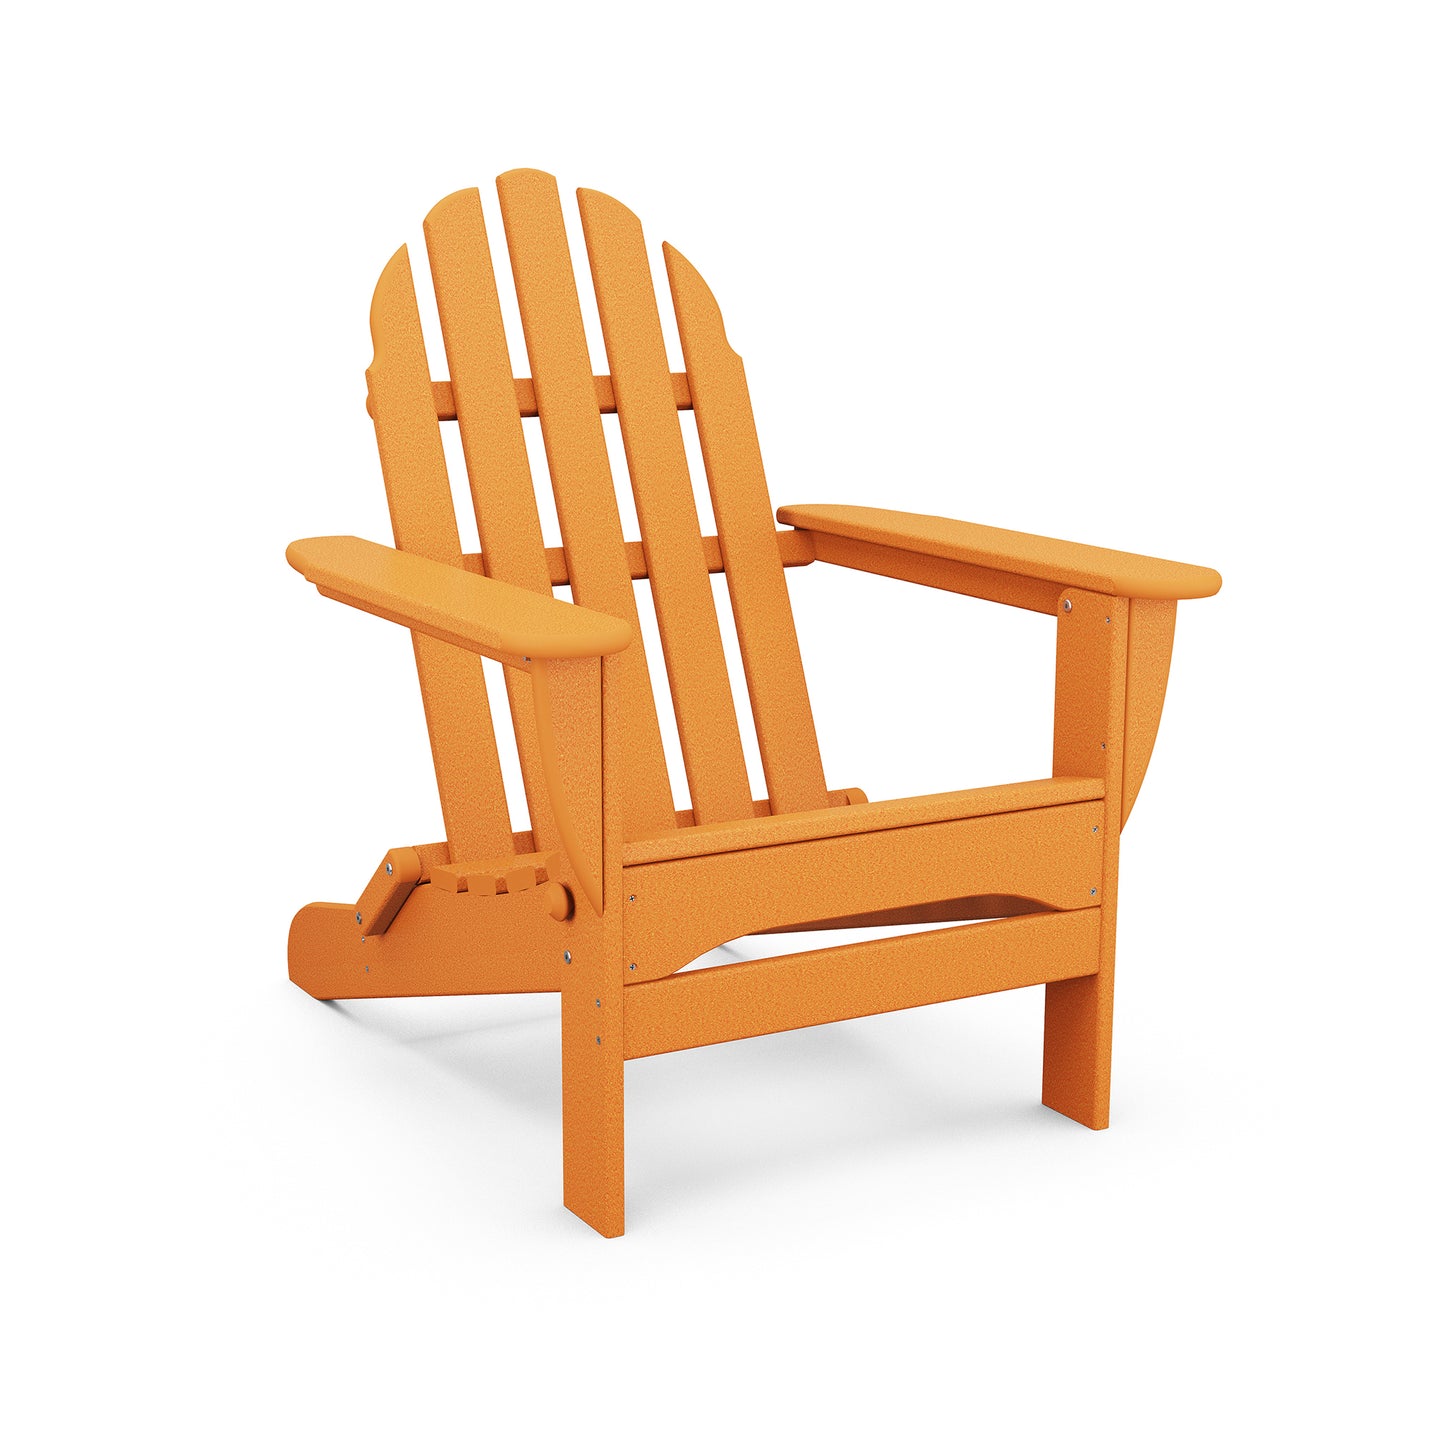 A POLYWOOD Classic Folding Adirondack Chair, made of plastic, shown in isolation on a white background. The chair features a slatted back and wide armrests, typical of this style.